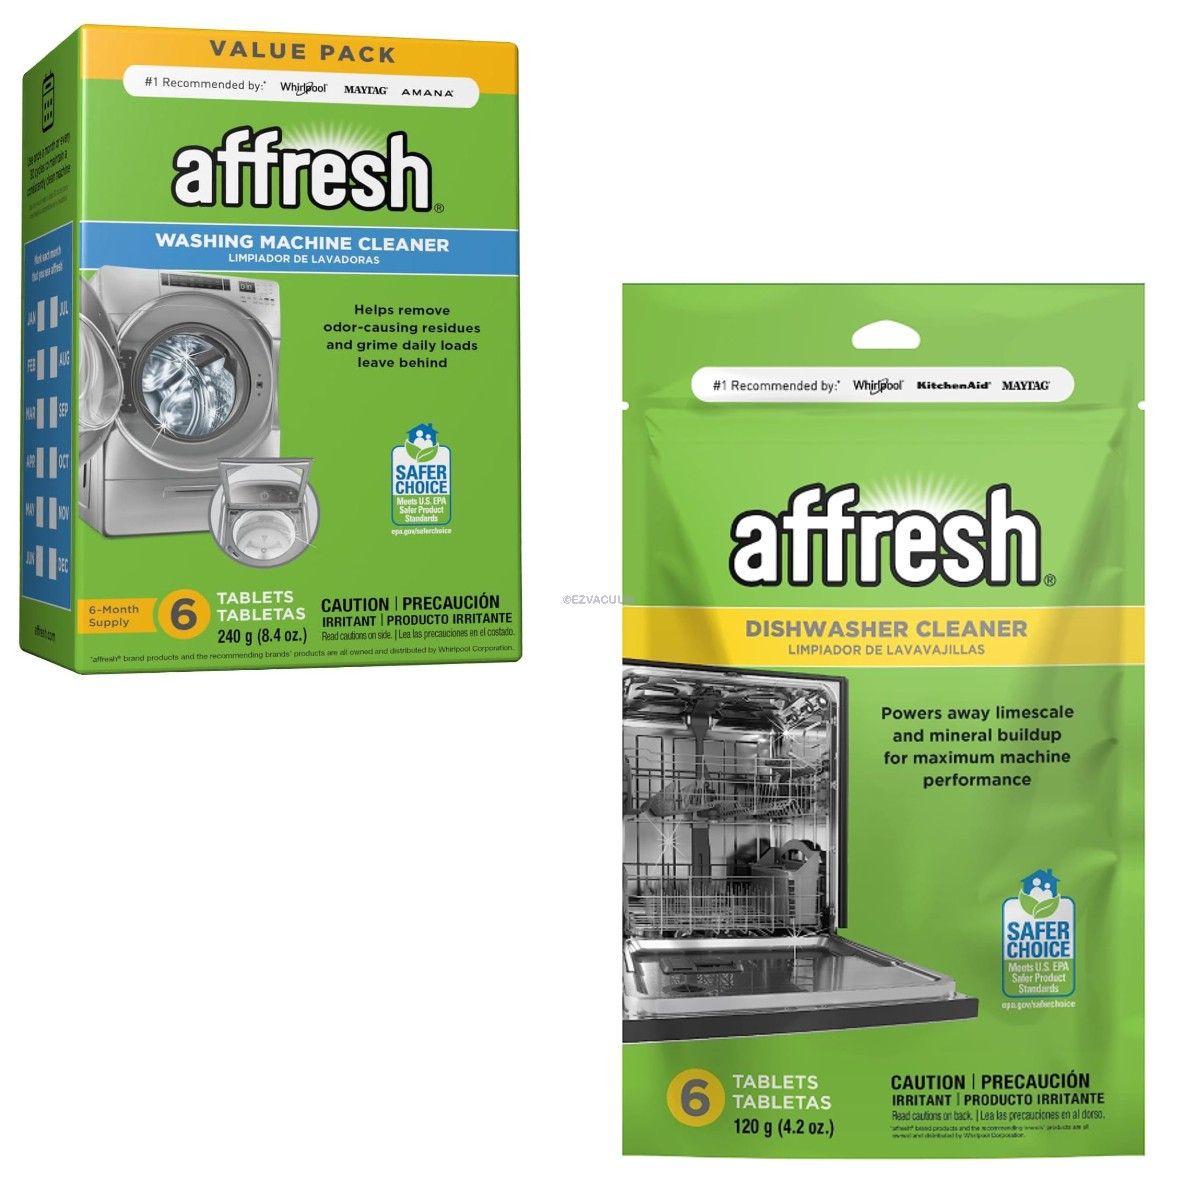 Affresh Washing Machine Cleaner, 6-Month Supply, Tablets, Value Pack